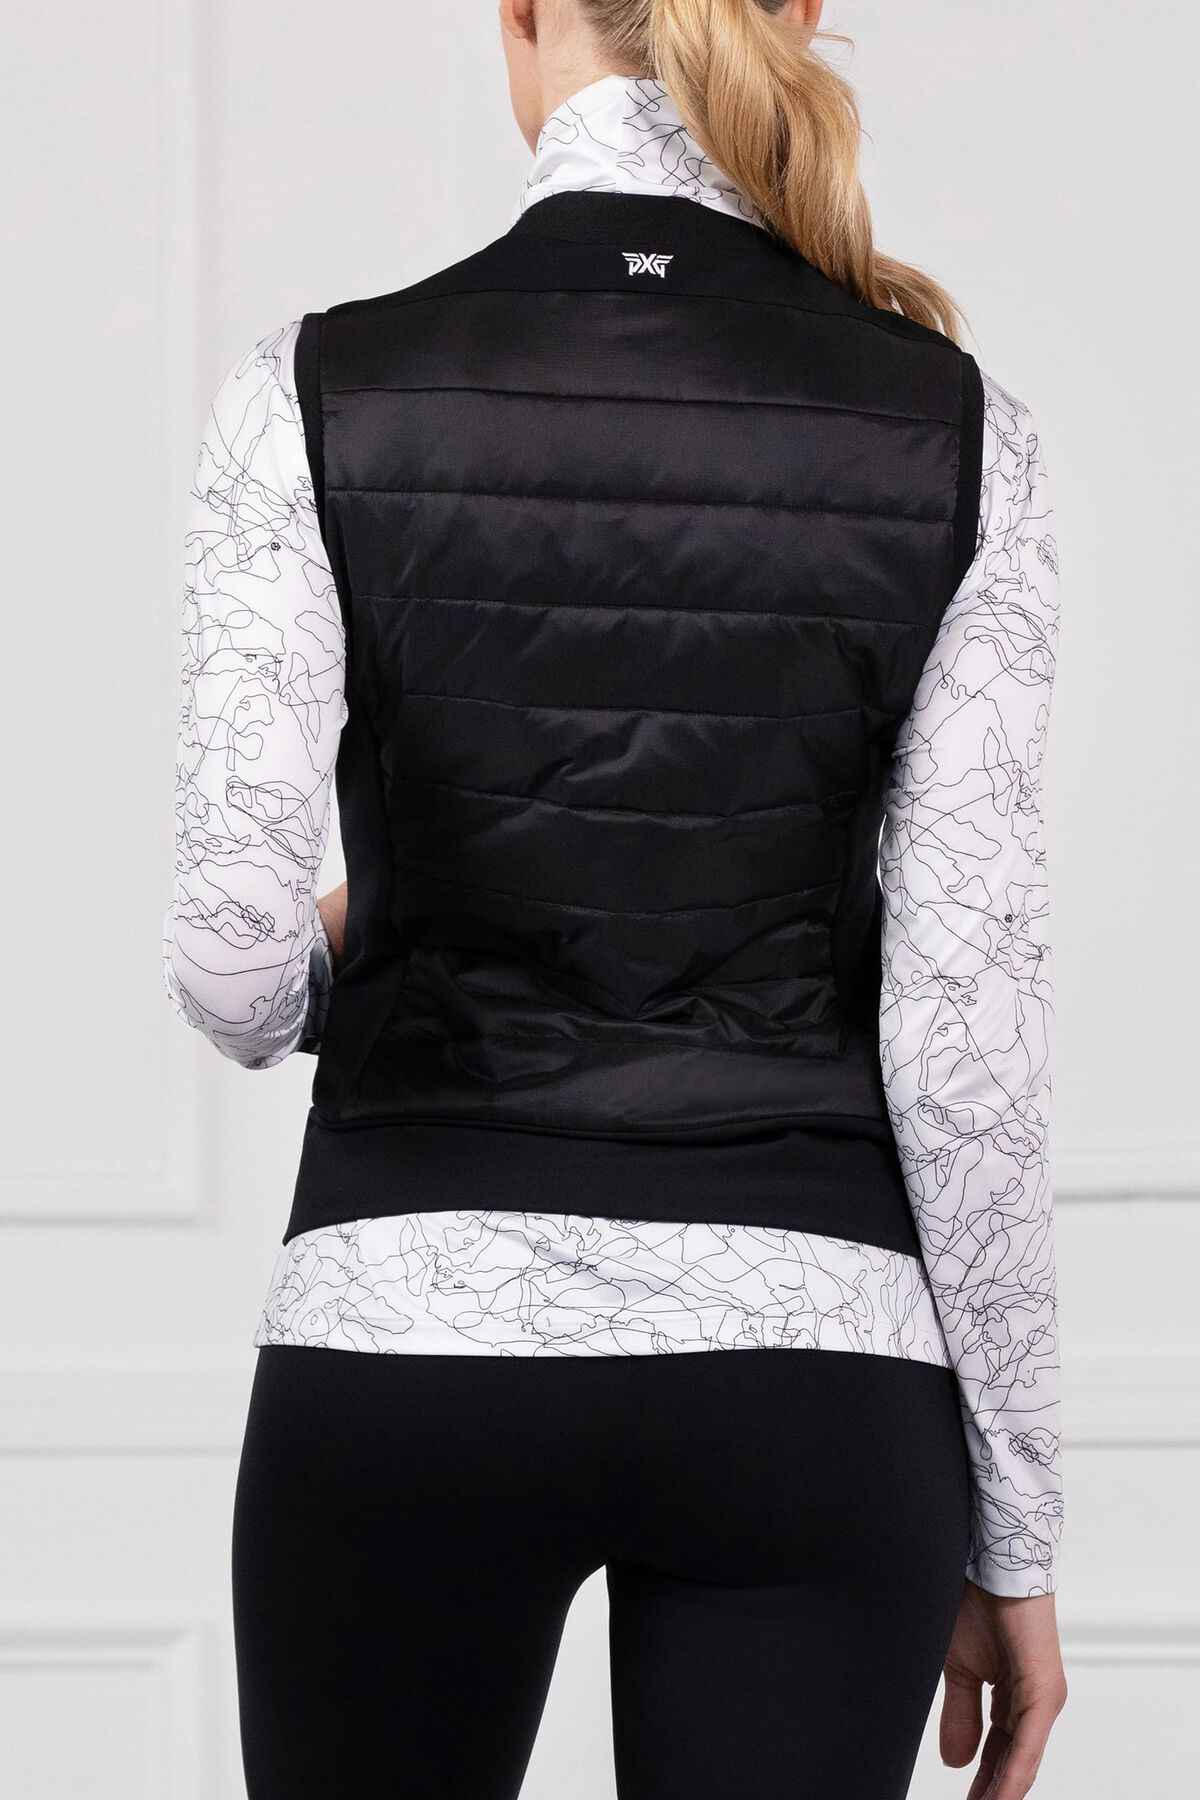 Quilted Core Down Hybrid Vest 